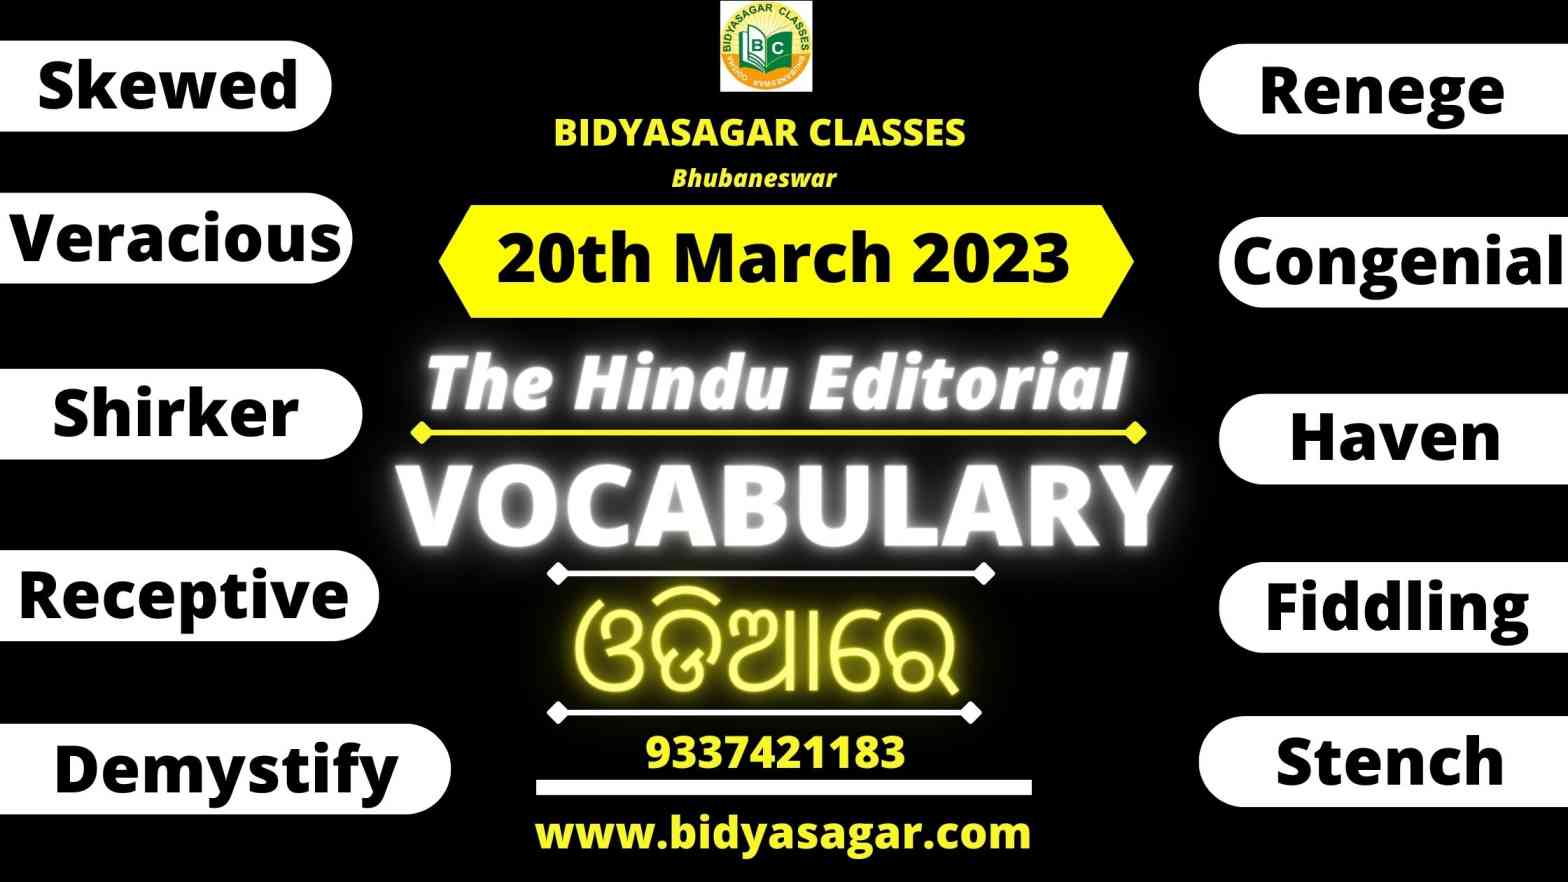 The Hindu Editorial Vocabulary of 20th March 2023